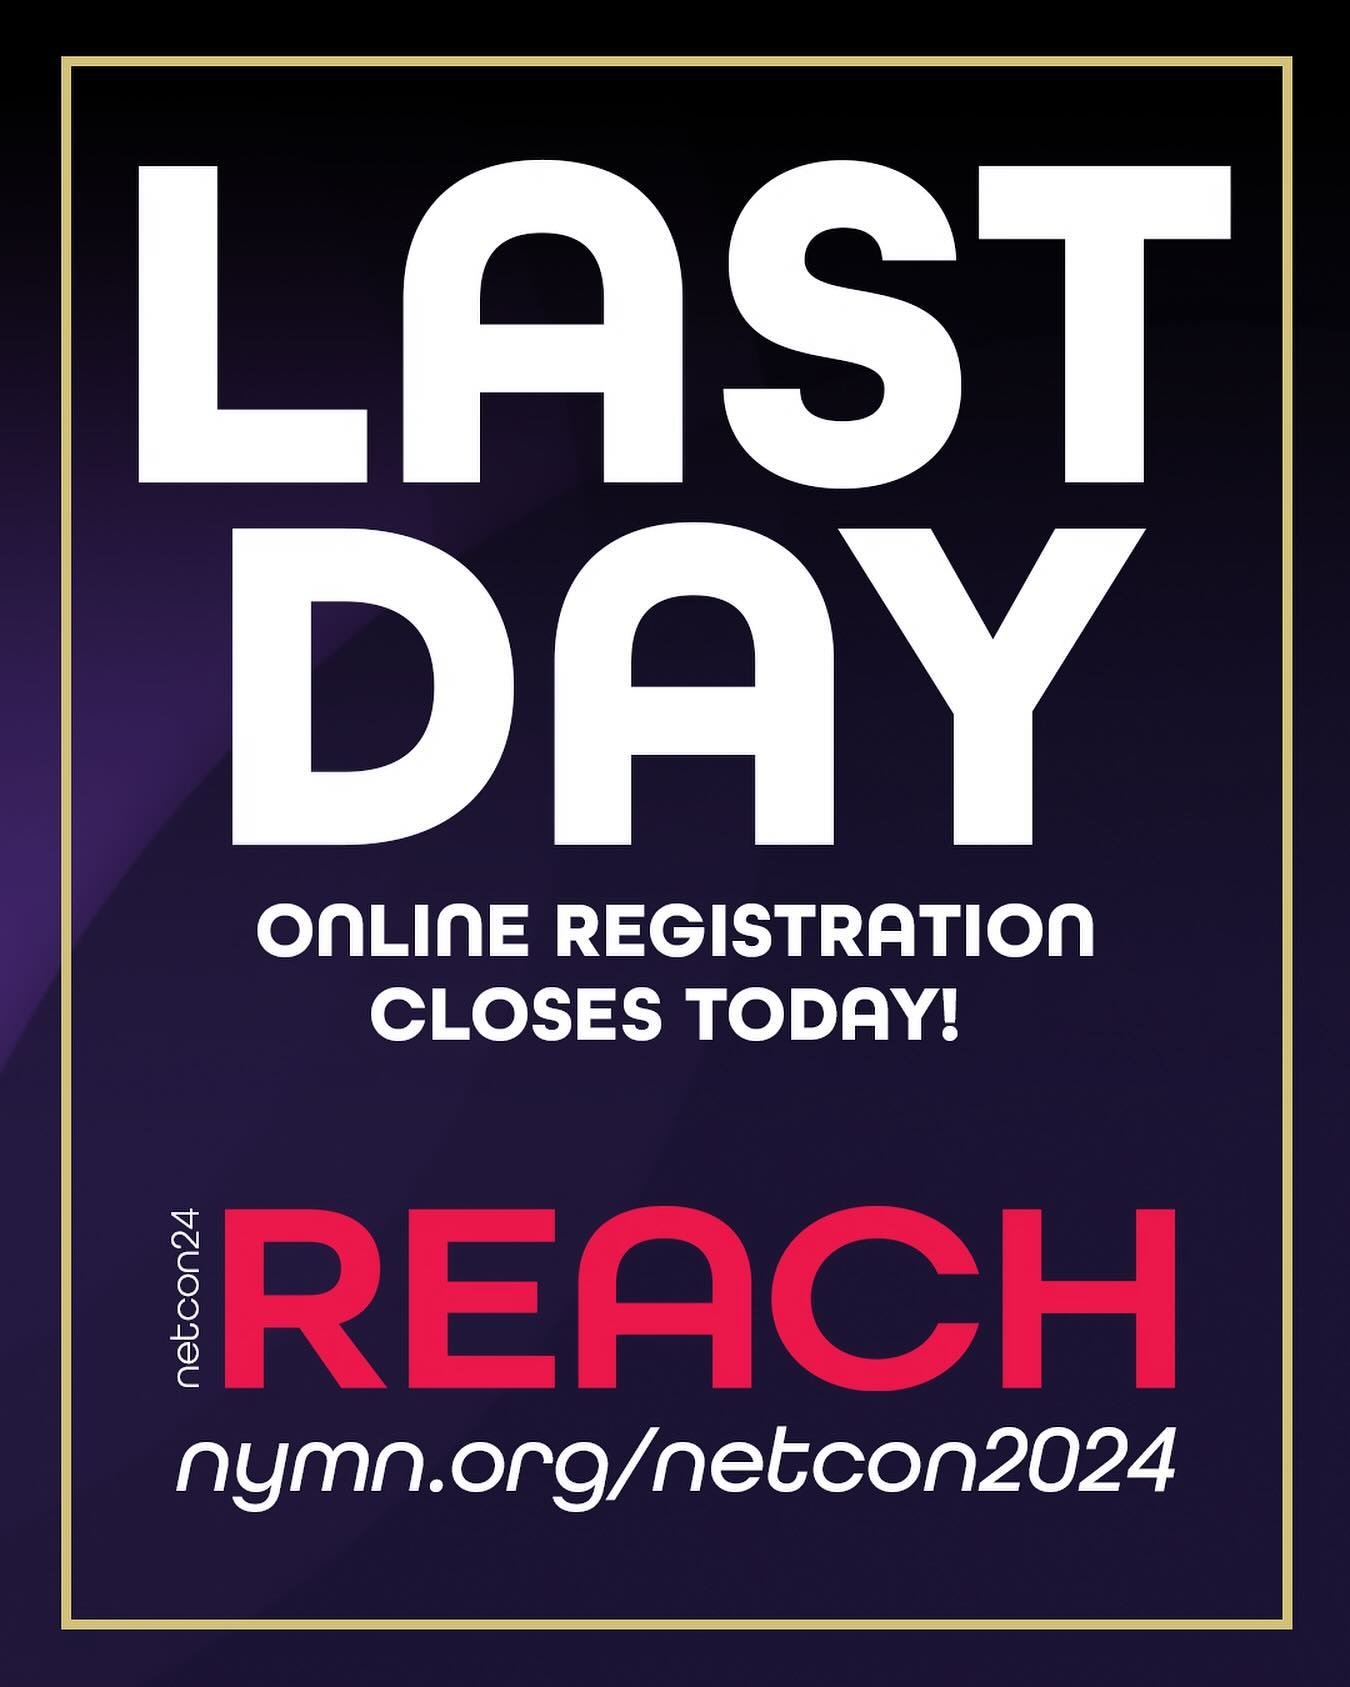 Online registration closes TODAY! If you havnt registered yet please go register right now. We&rsquo;ve got great plans for our conference but we need you there. Go to NYMN.org/netcon2024 to get registered and see everything that&rsquo;s happening!